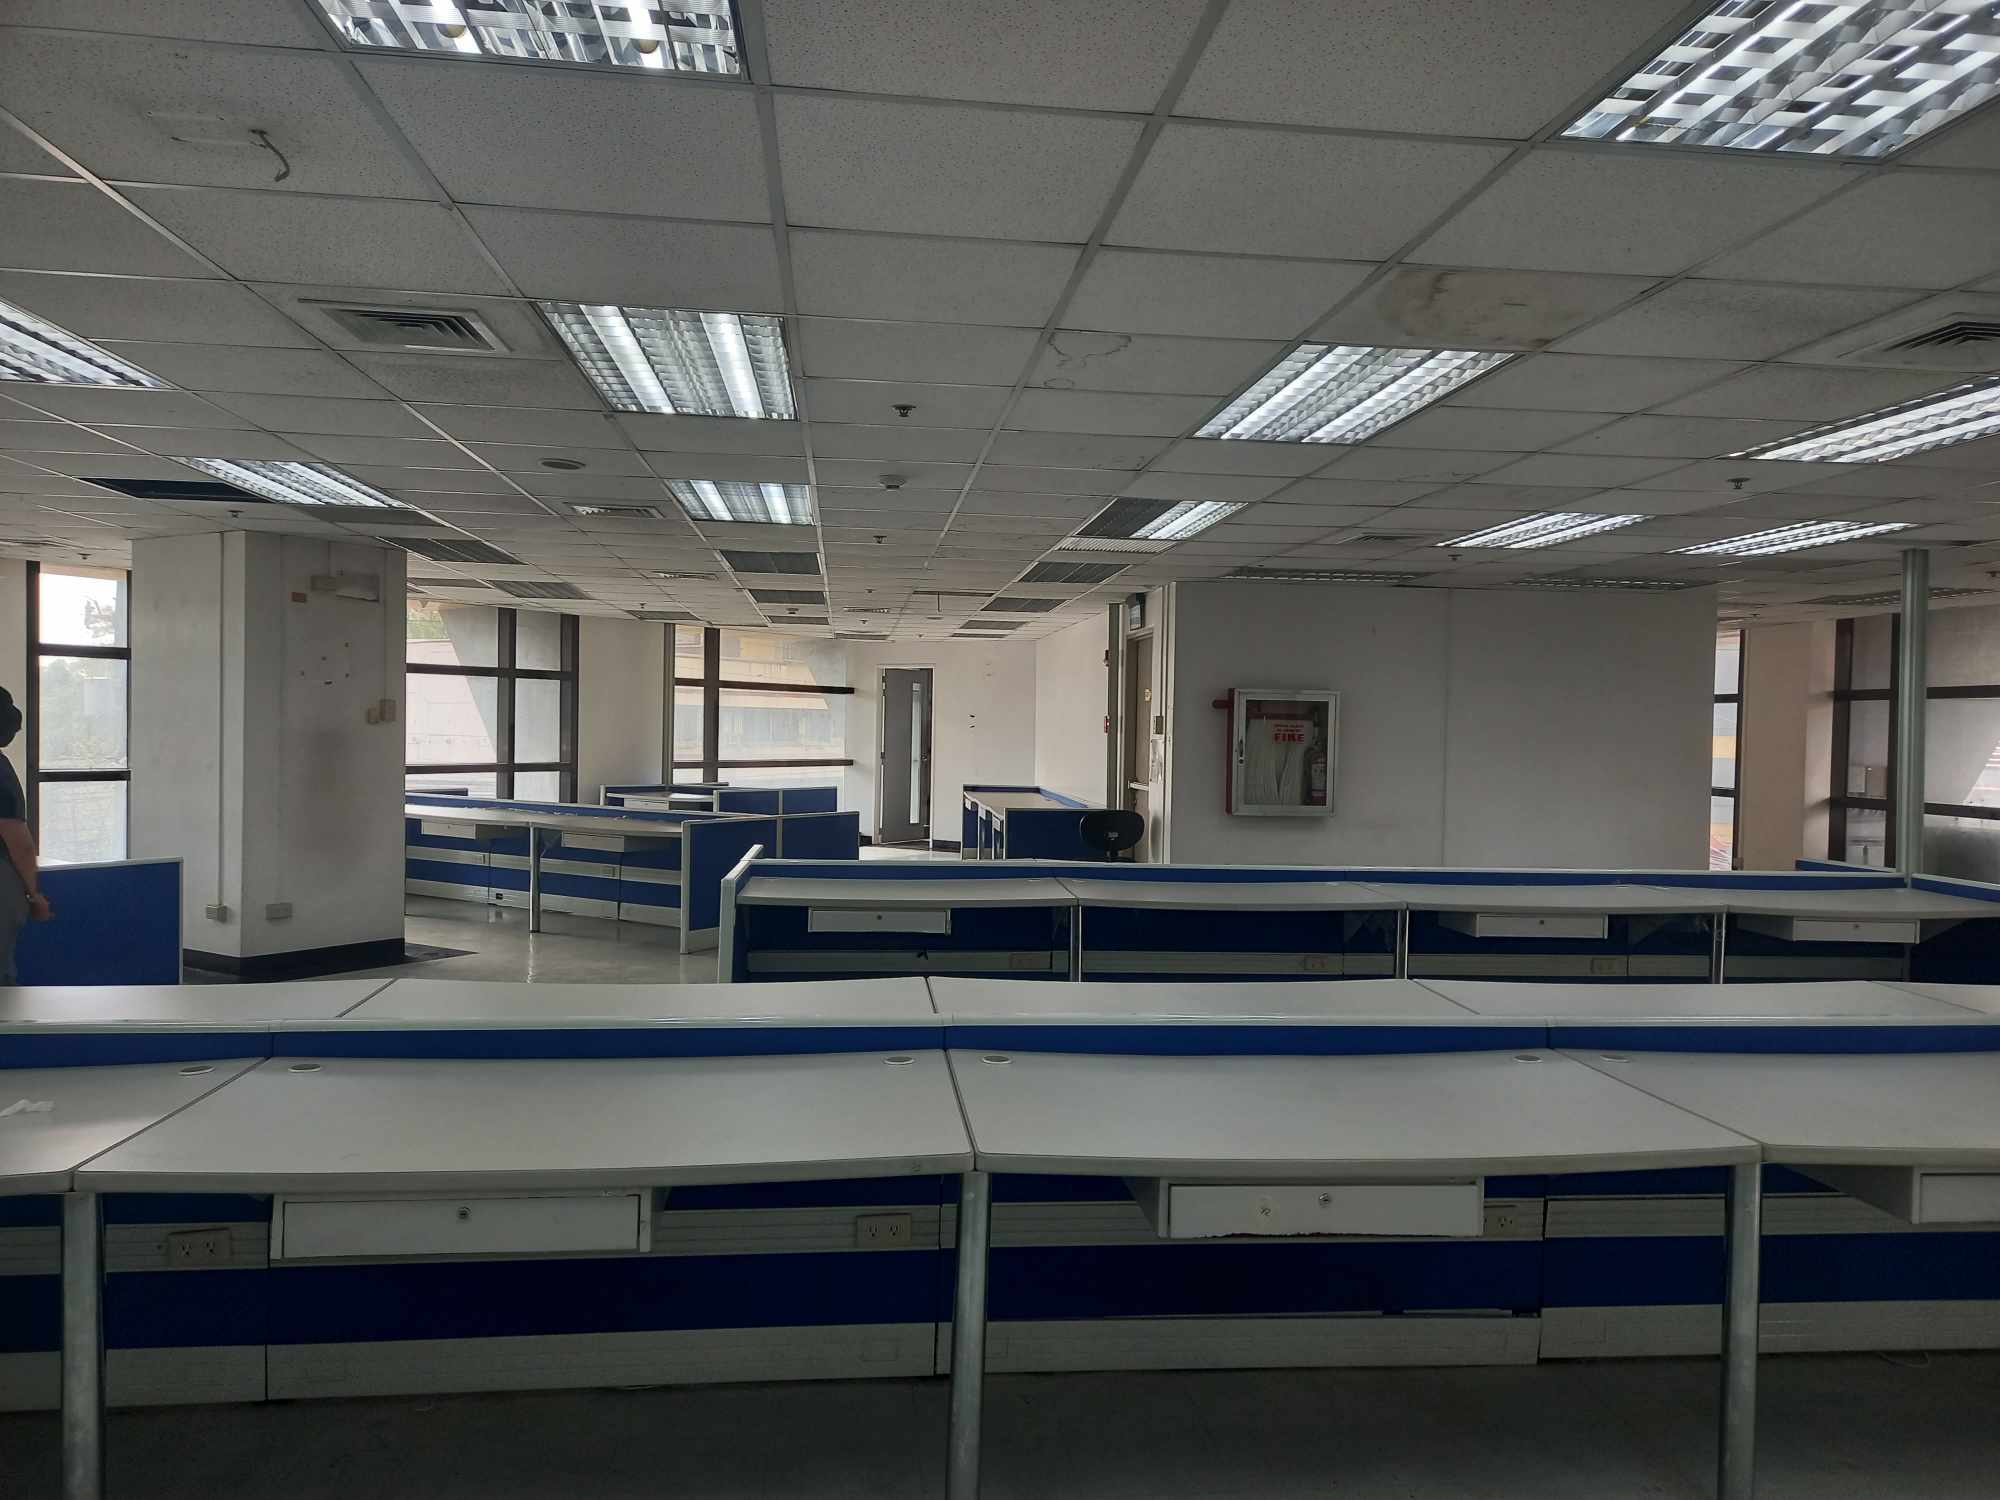 For Rent Lease Office Space Mandaluyong City Manila 583 sqm